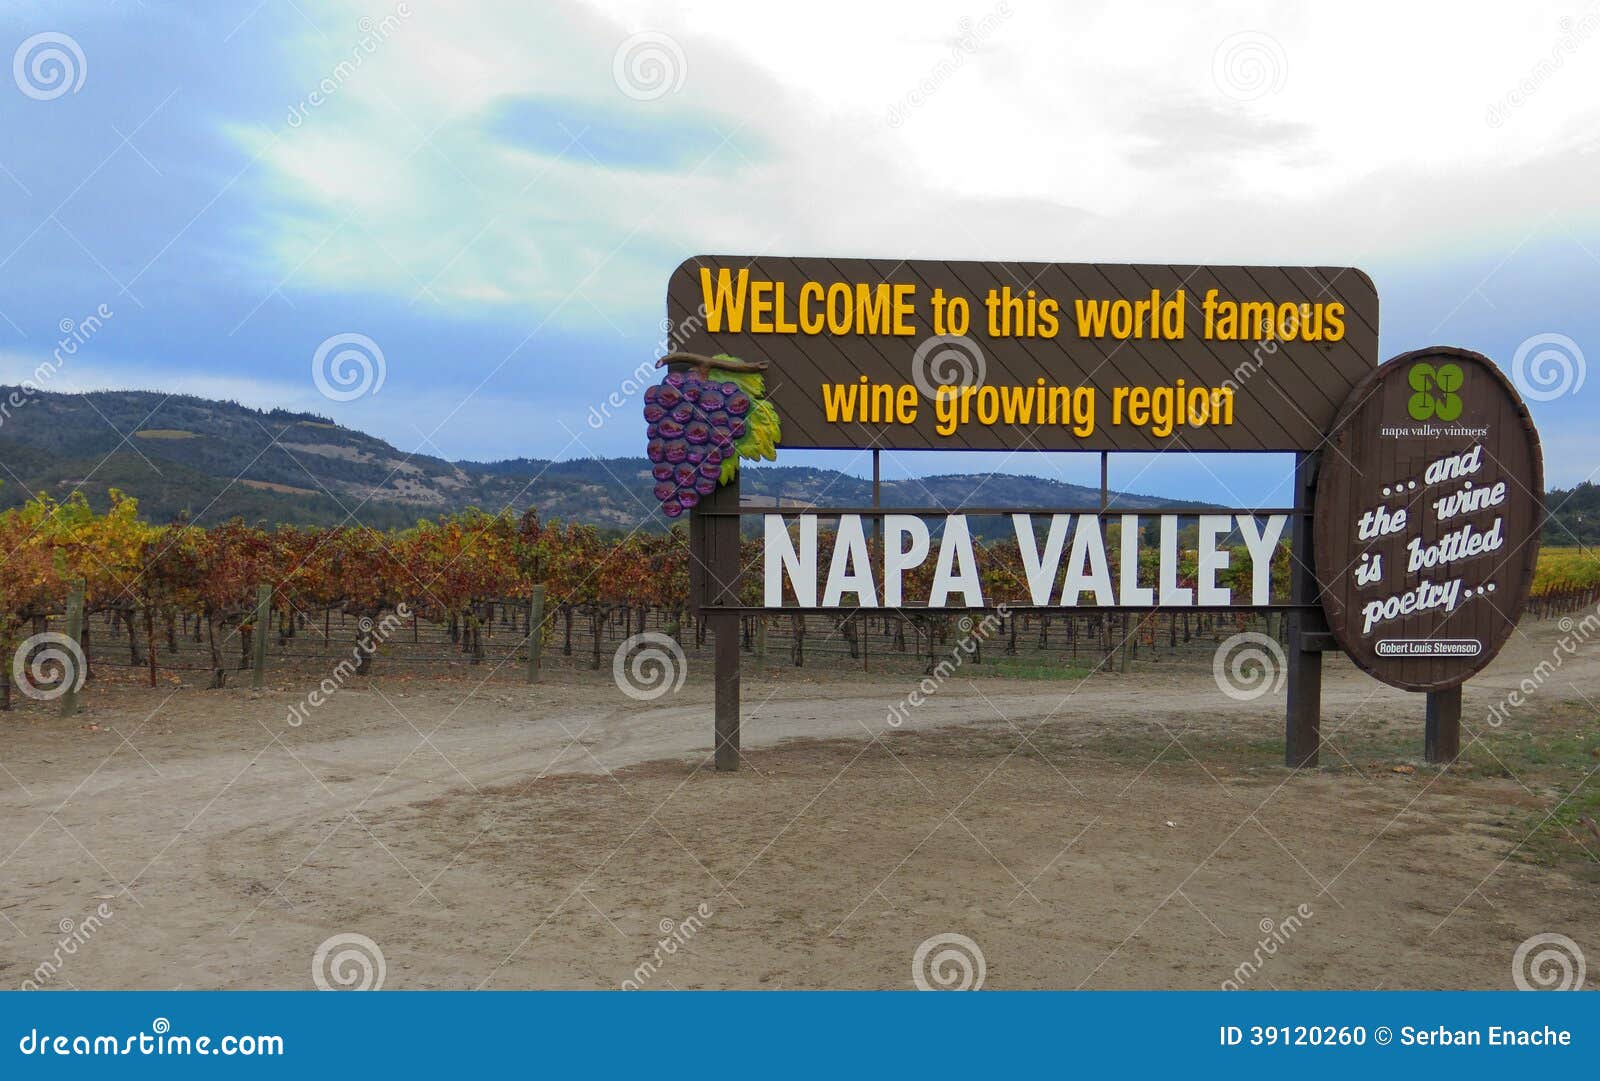 napa valley california welcome sign